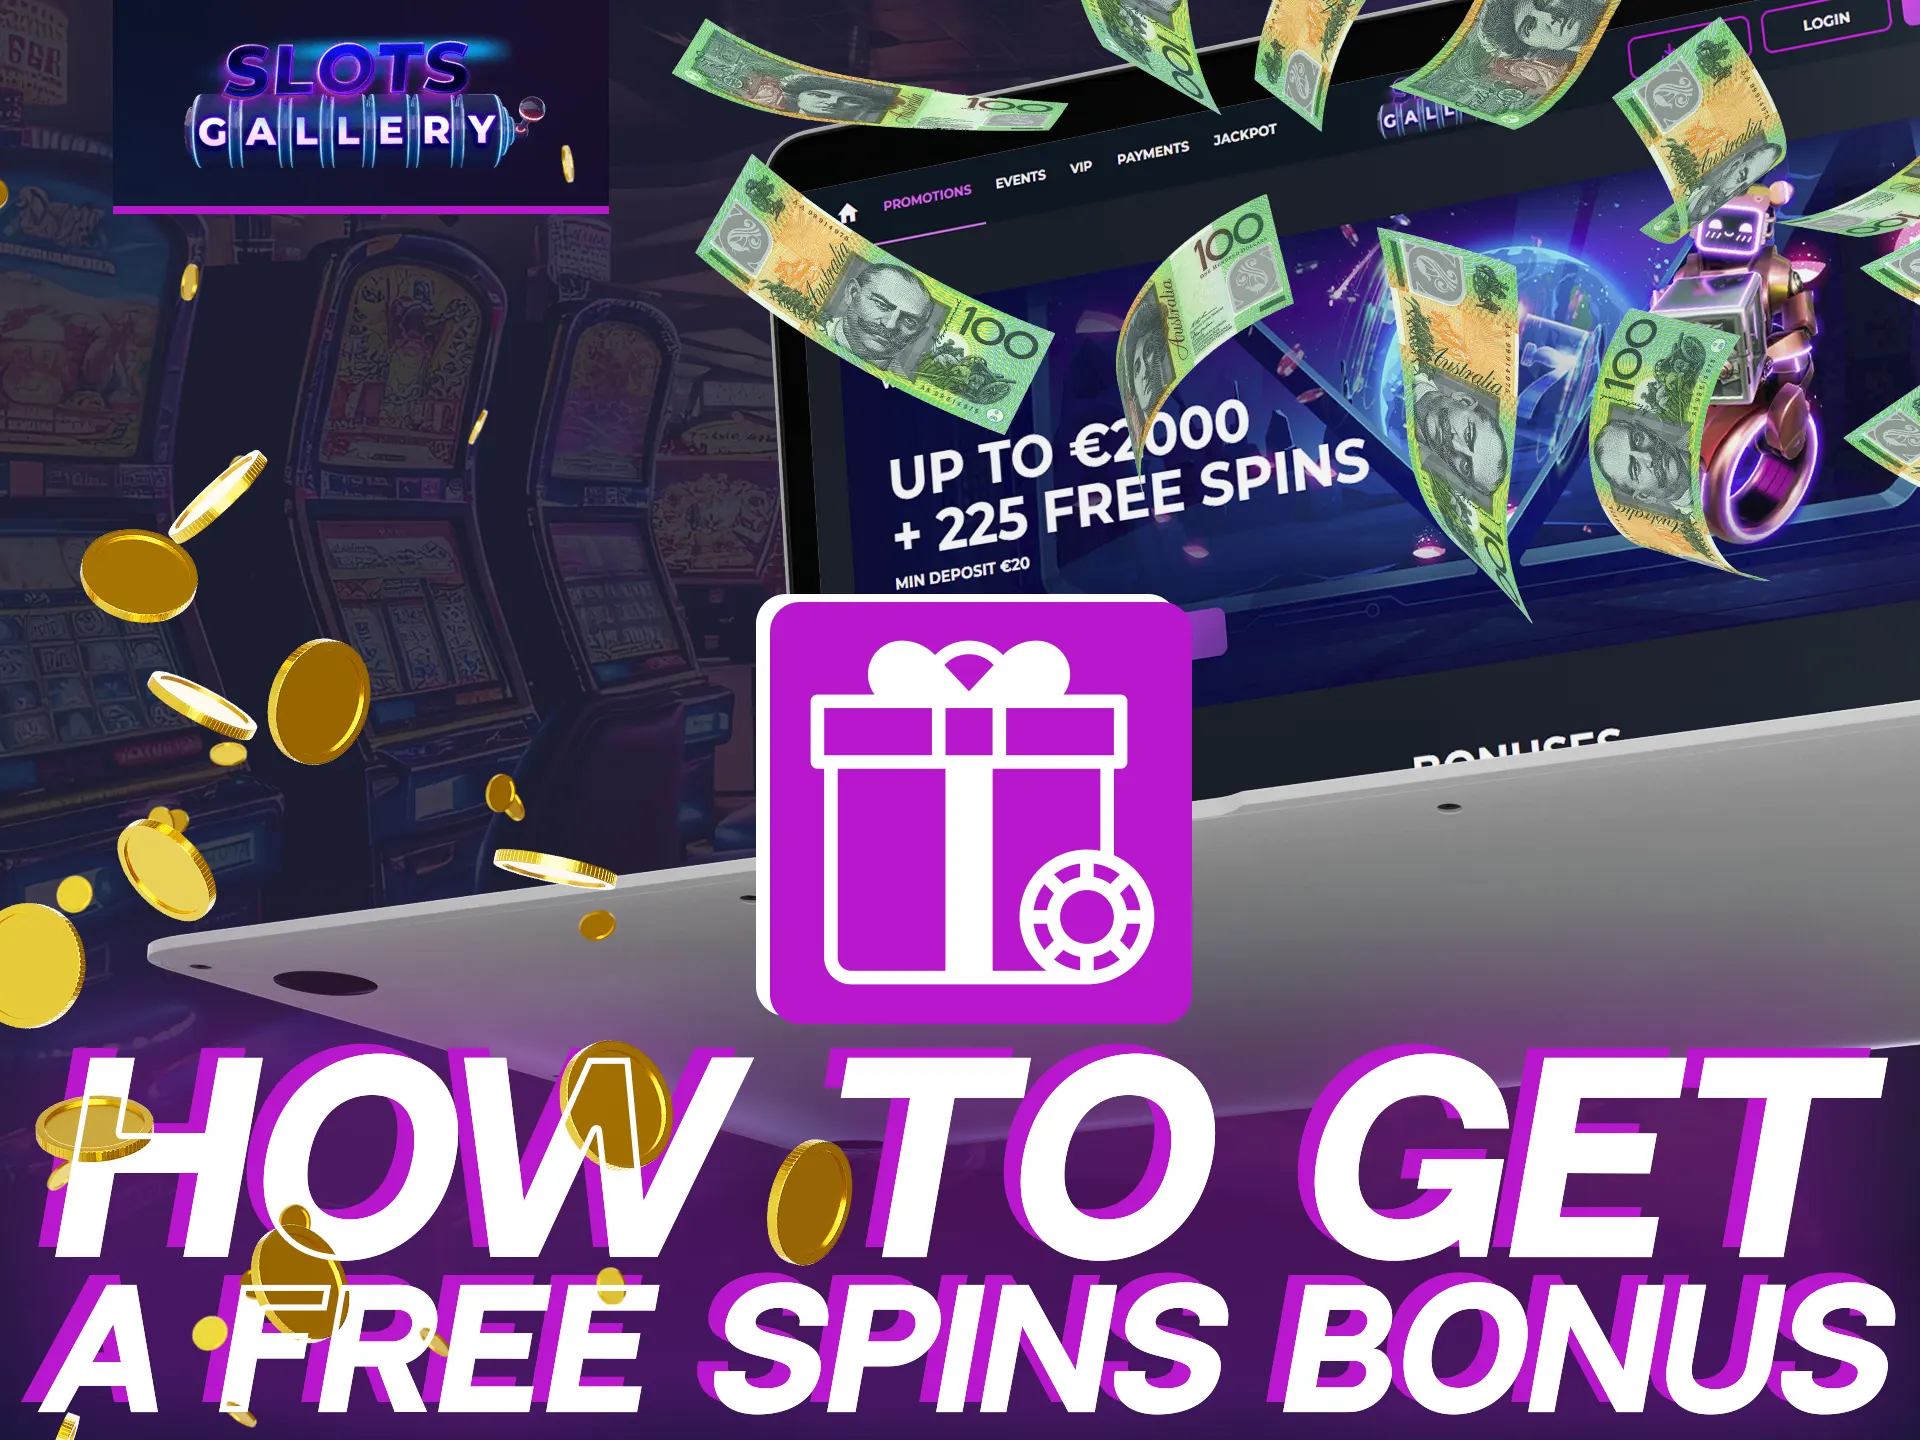 Register, use code, and enjoy free spins at Slots Gallery.